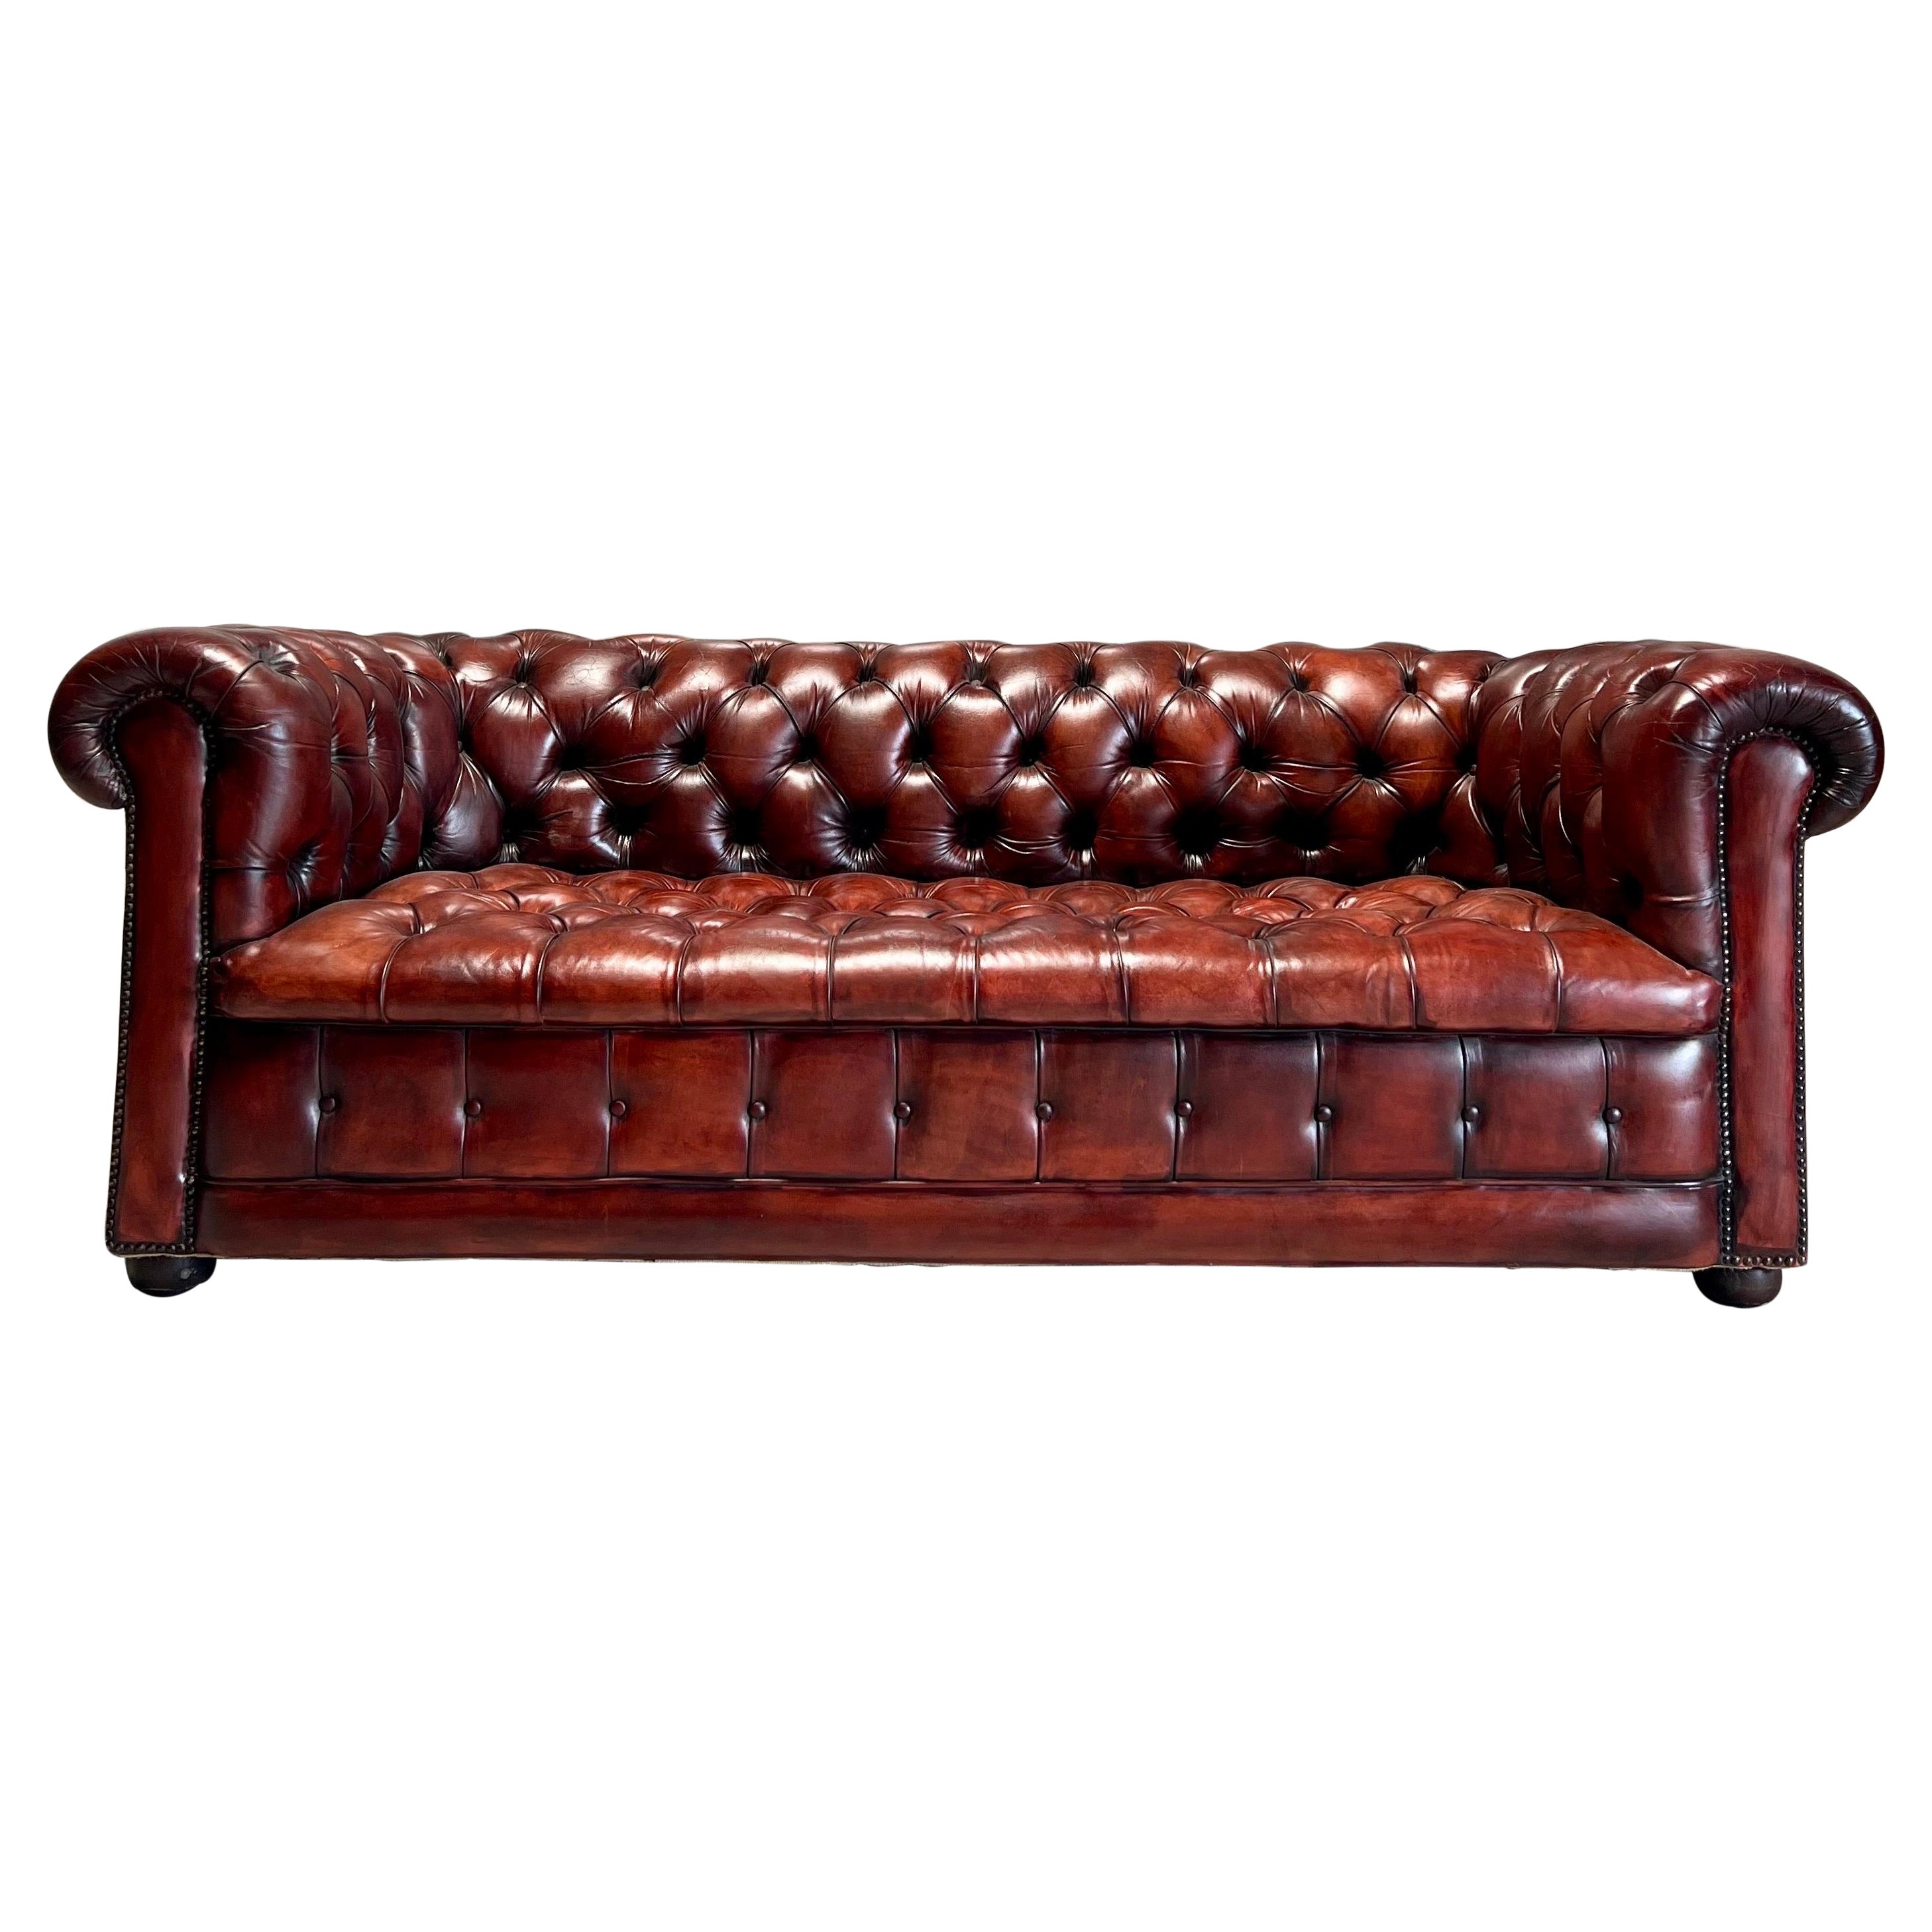 Stunning MidC Chesterfield Sofa in Hand Dyed Leathers For Sale